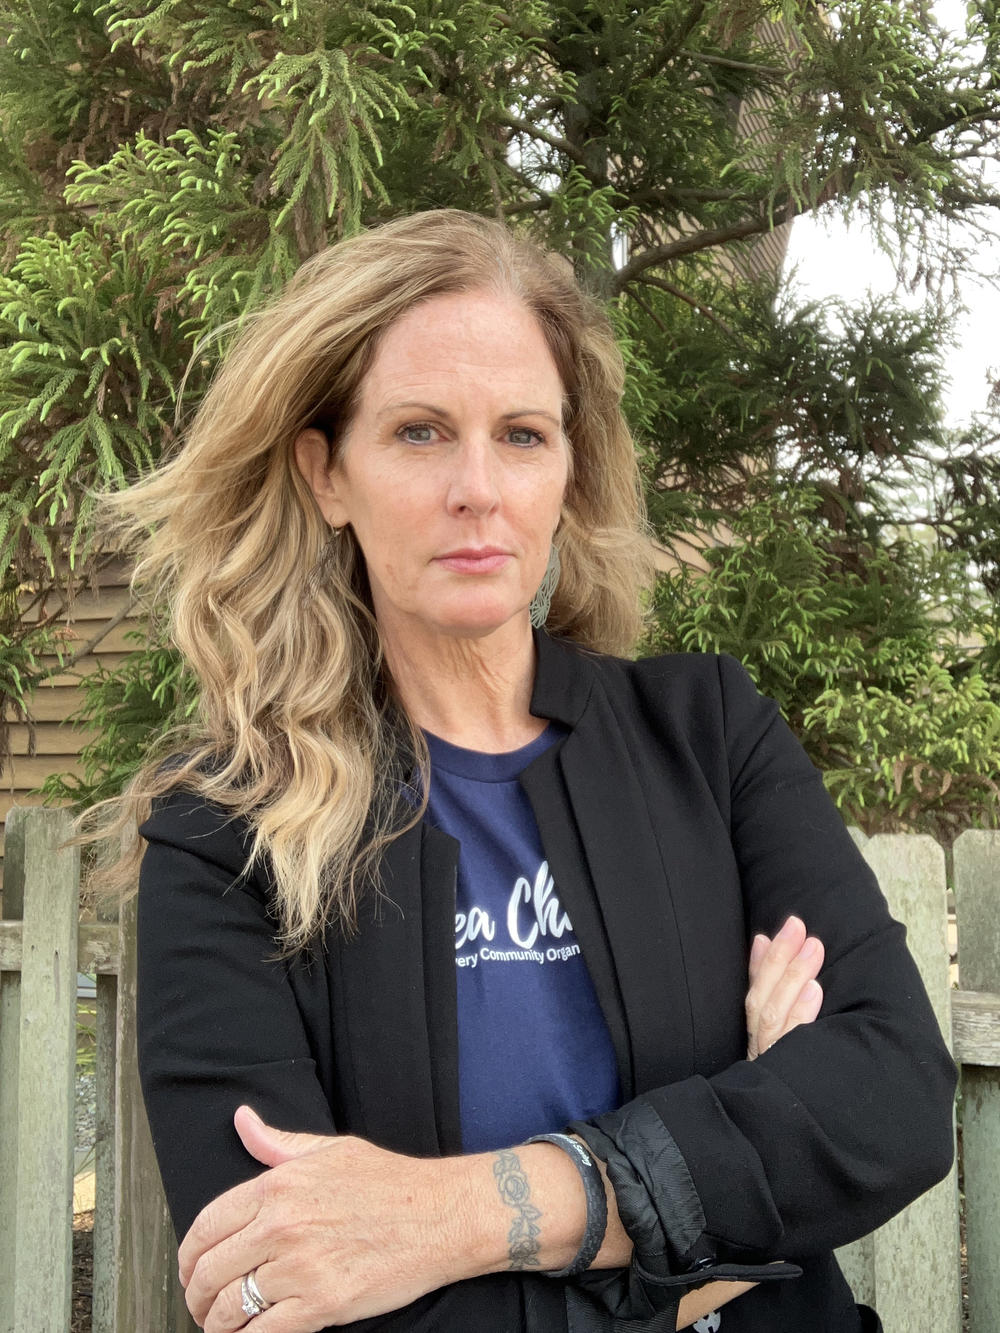 Elizabeth Burke Beaty is in long-term recovery from substance use disorder and runs Sea Change, a nonprofit recovery community organization in New Jersey. She says people who have seen the pitfalls of the addiction and criminal justice systems know best where to direct opioid settlement dollars.